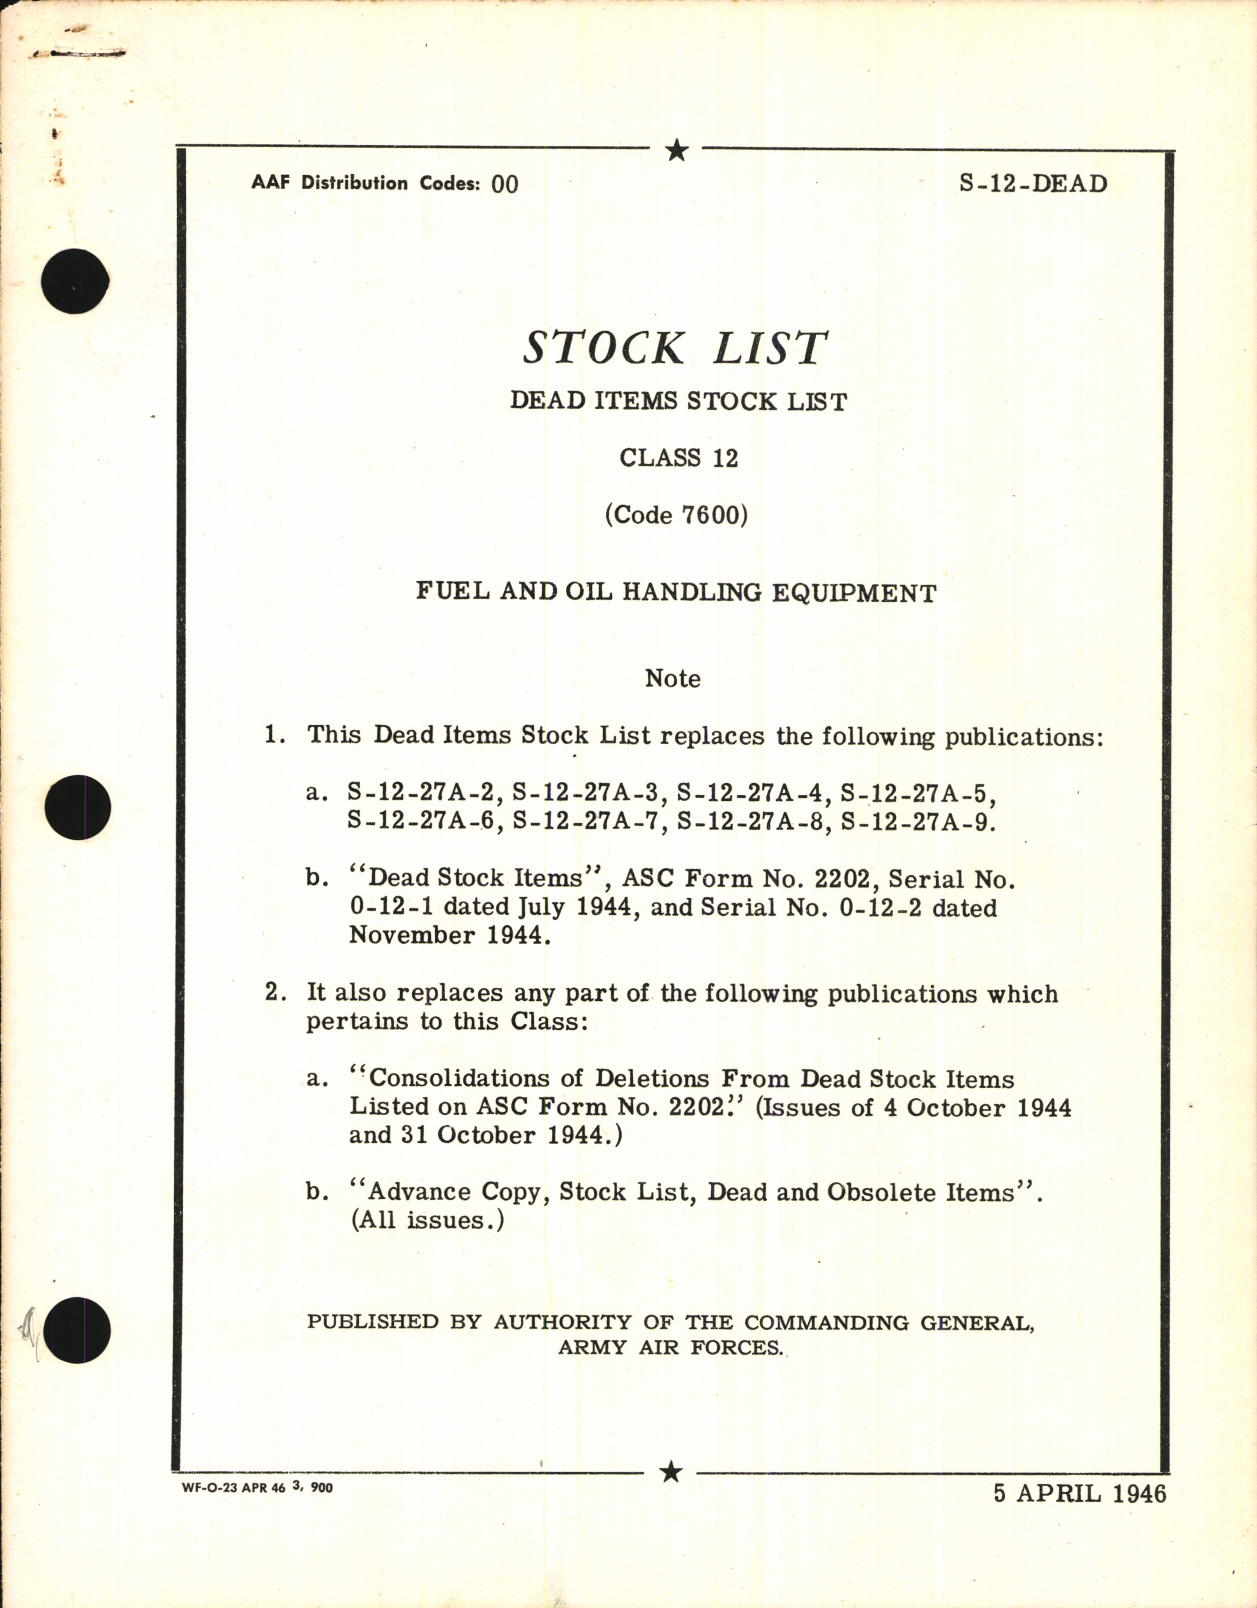 Sample page 1 from AirCorps Library document: Dead Items Stock List Fuel and Oil Handling Equipment